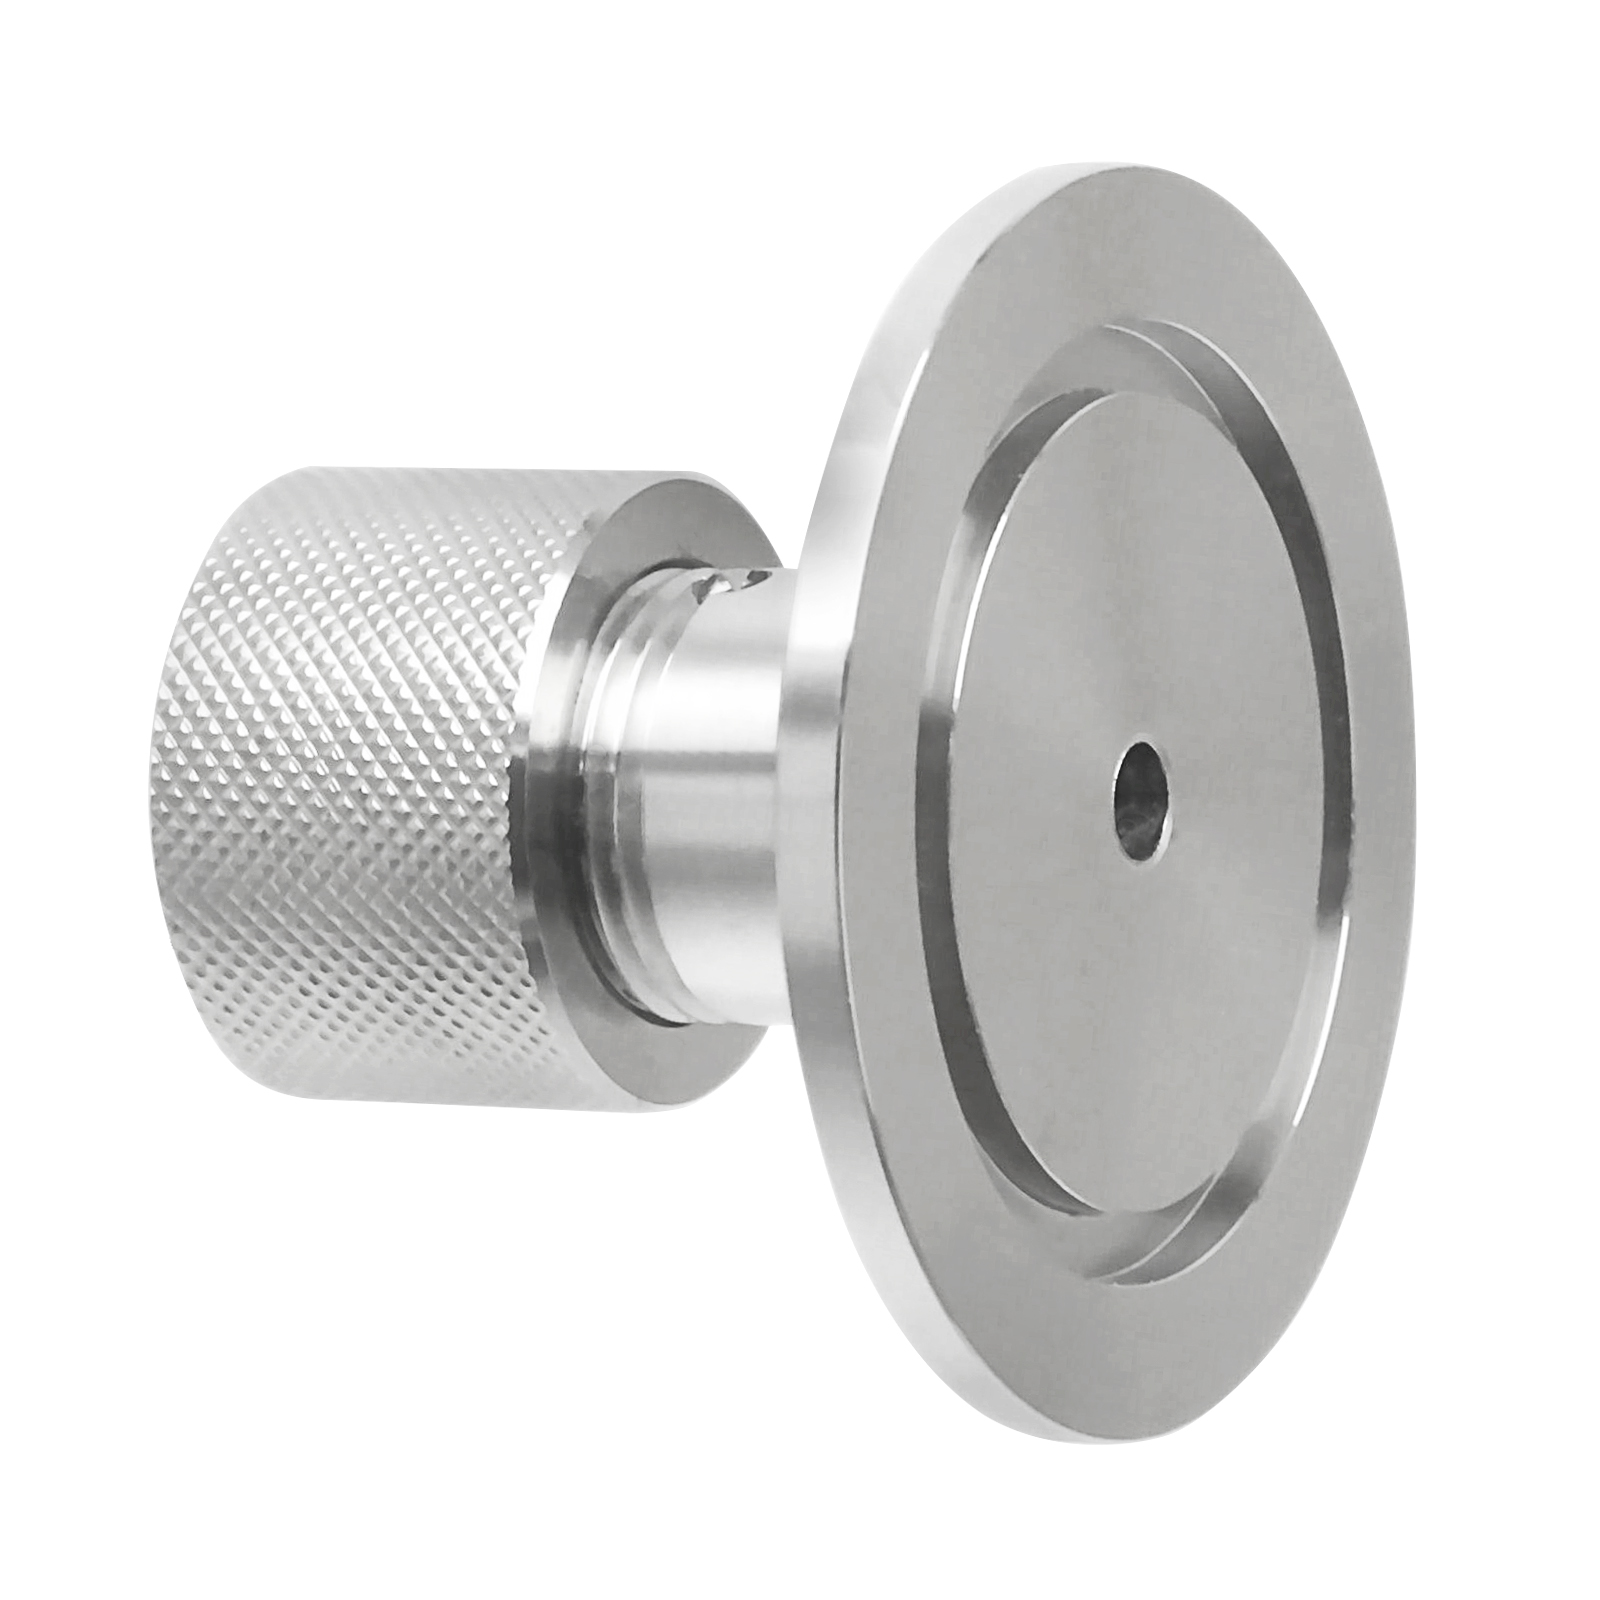 KF25 Stainless steel Flange Vacuum Vent Or Relief Valve For Chamber Vent